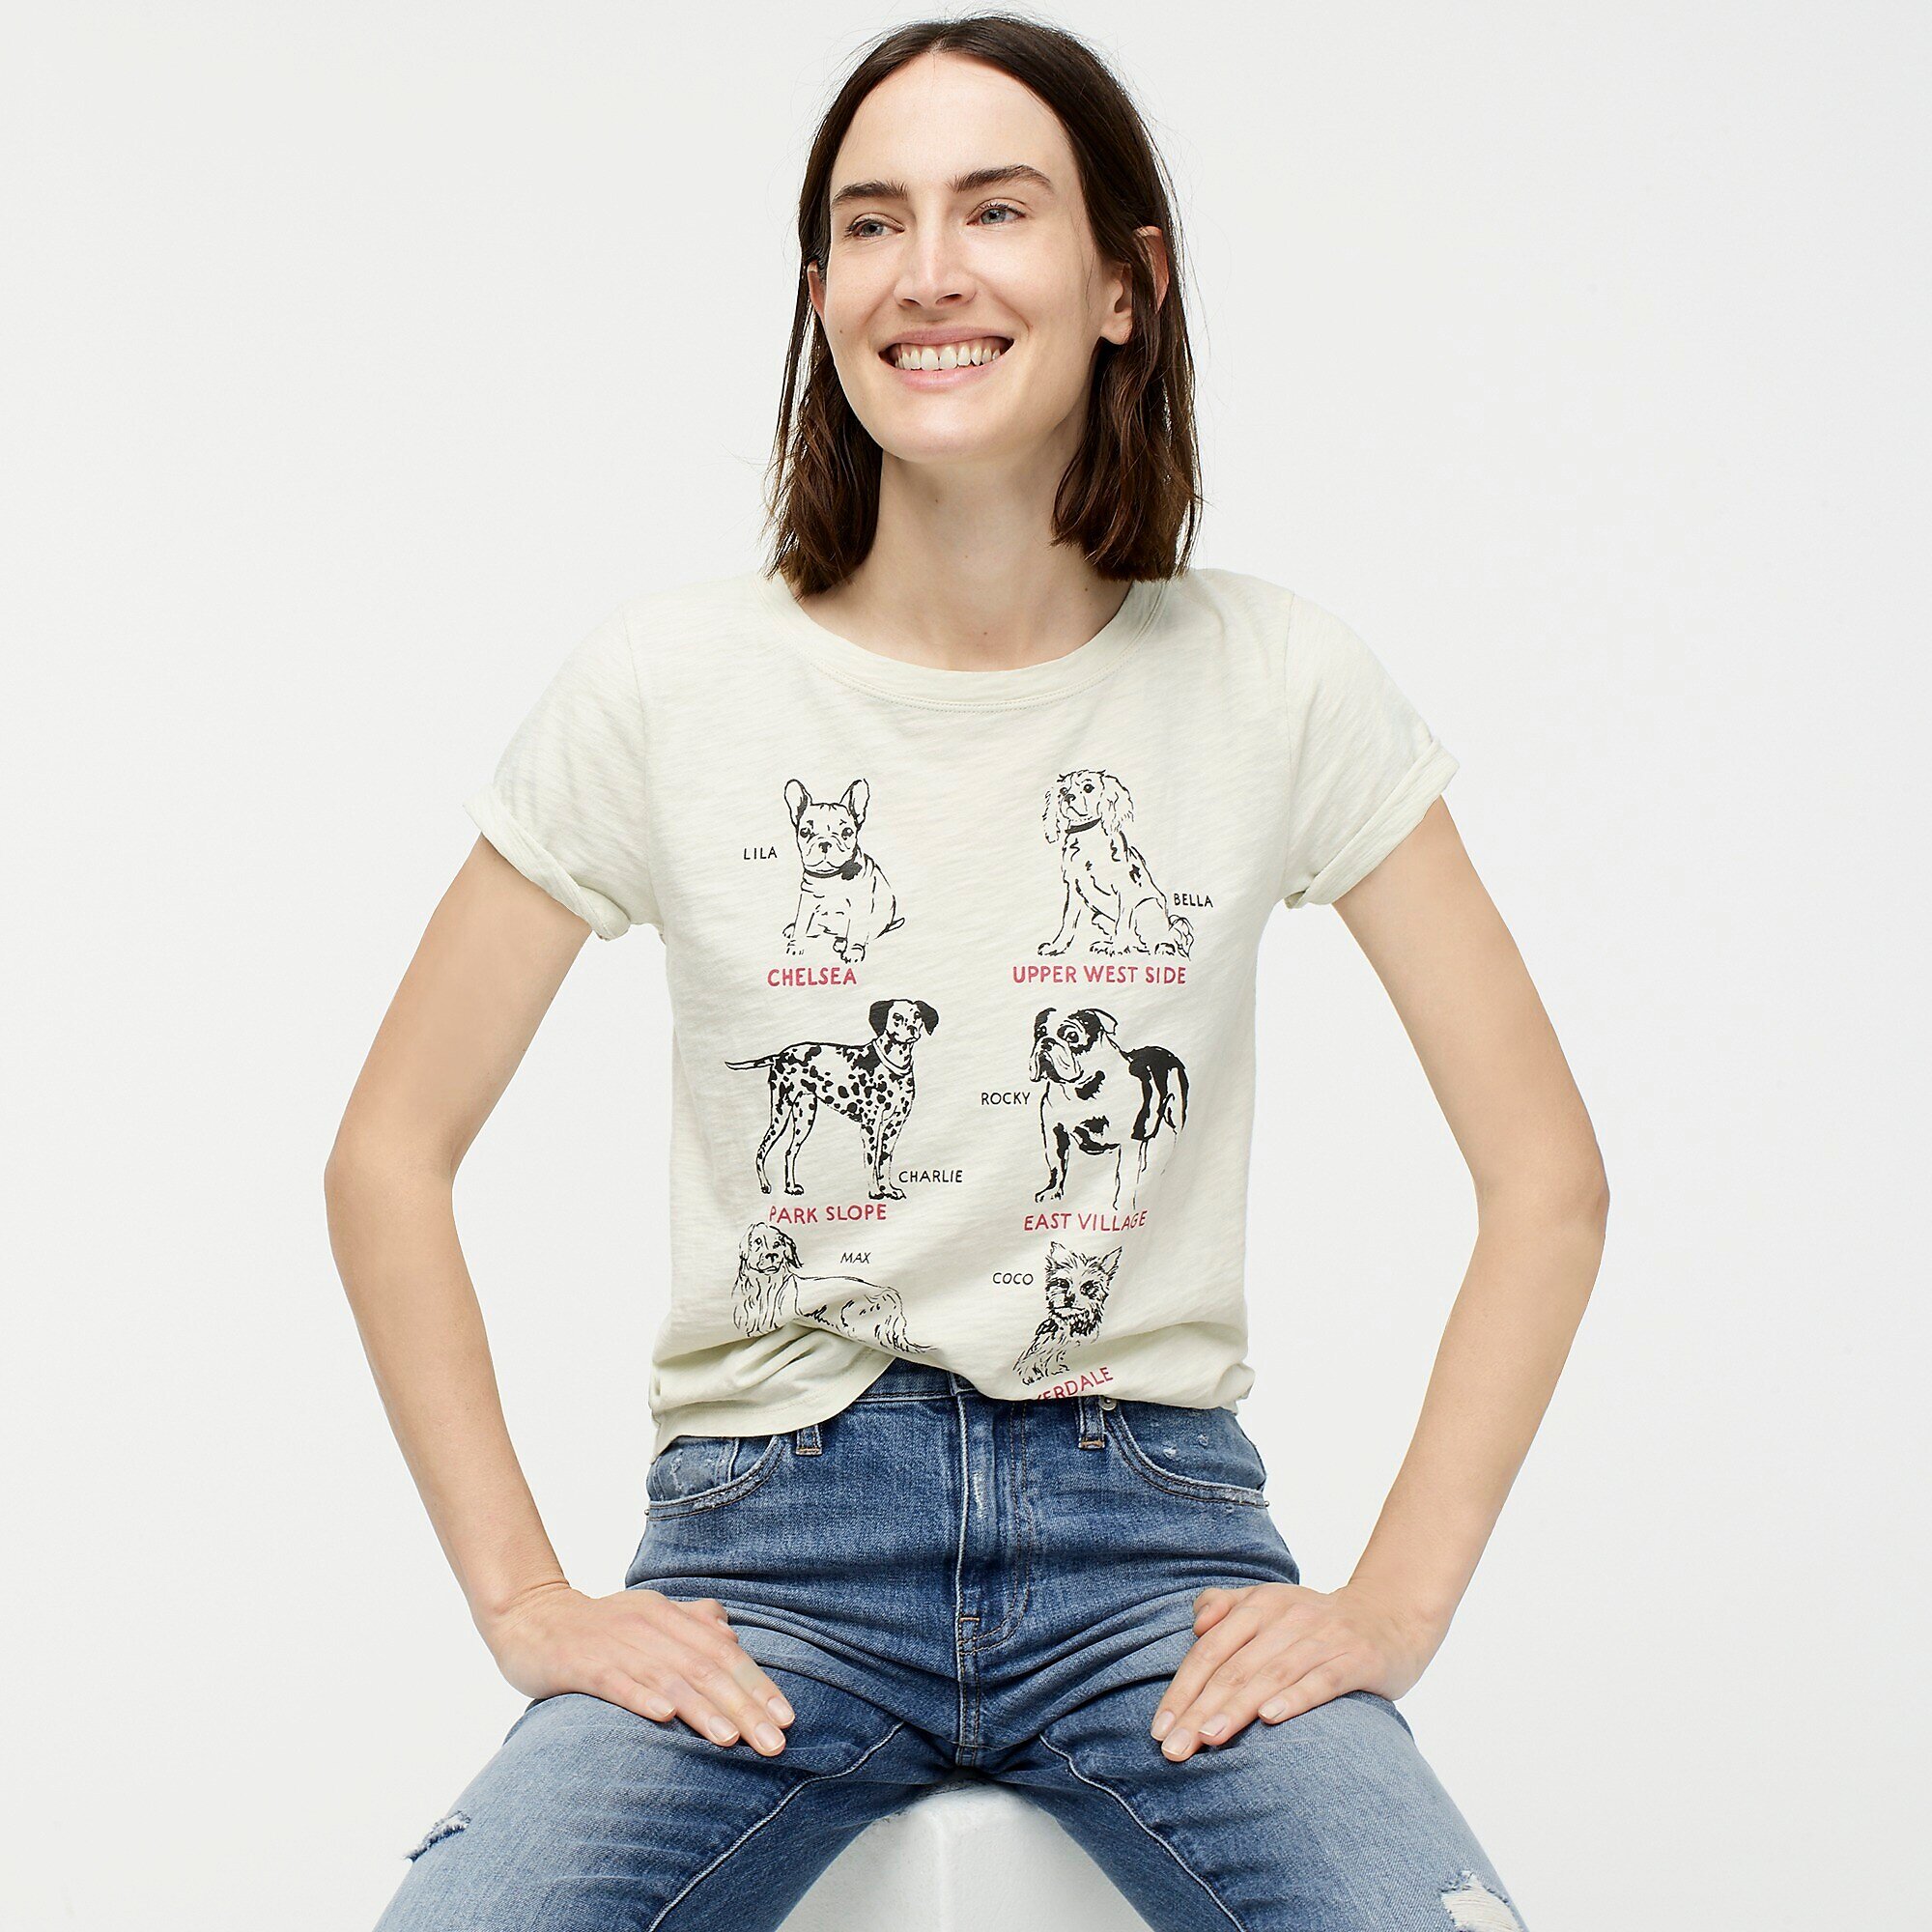 Camilla Atkins, CATKINS DESIGN for J. Crew, Summer 2019 Dogs of New York graphic design, screen printed tee shirt-2.jpeg